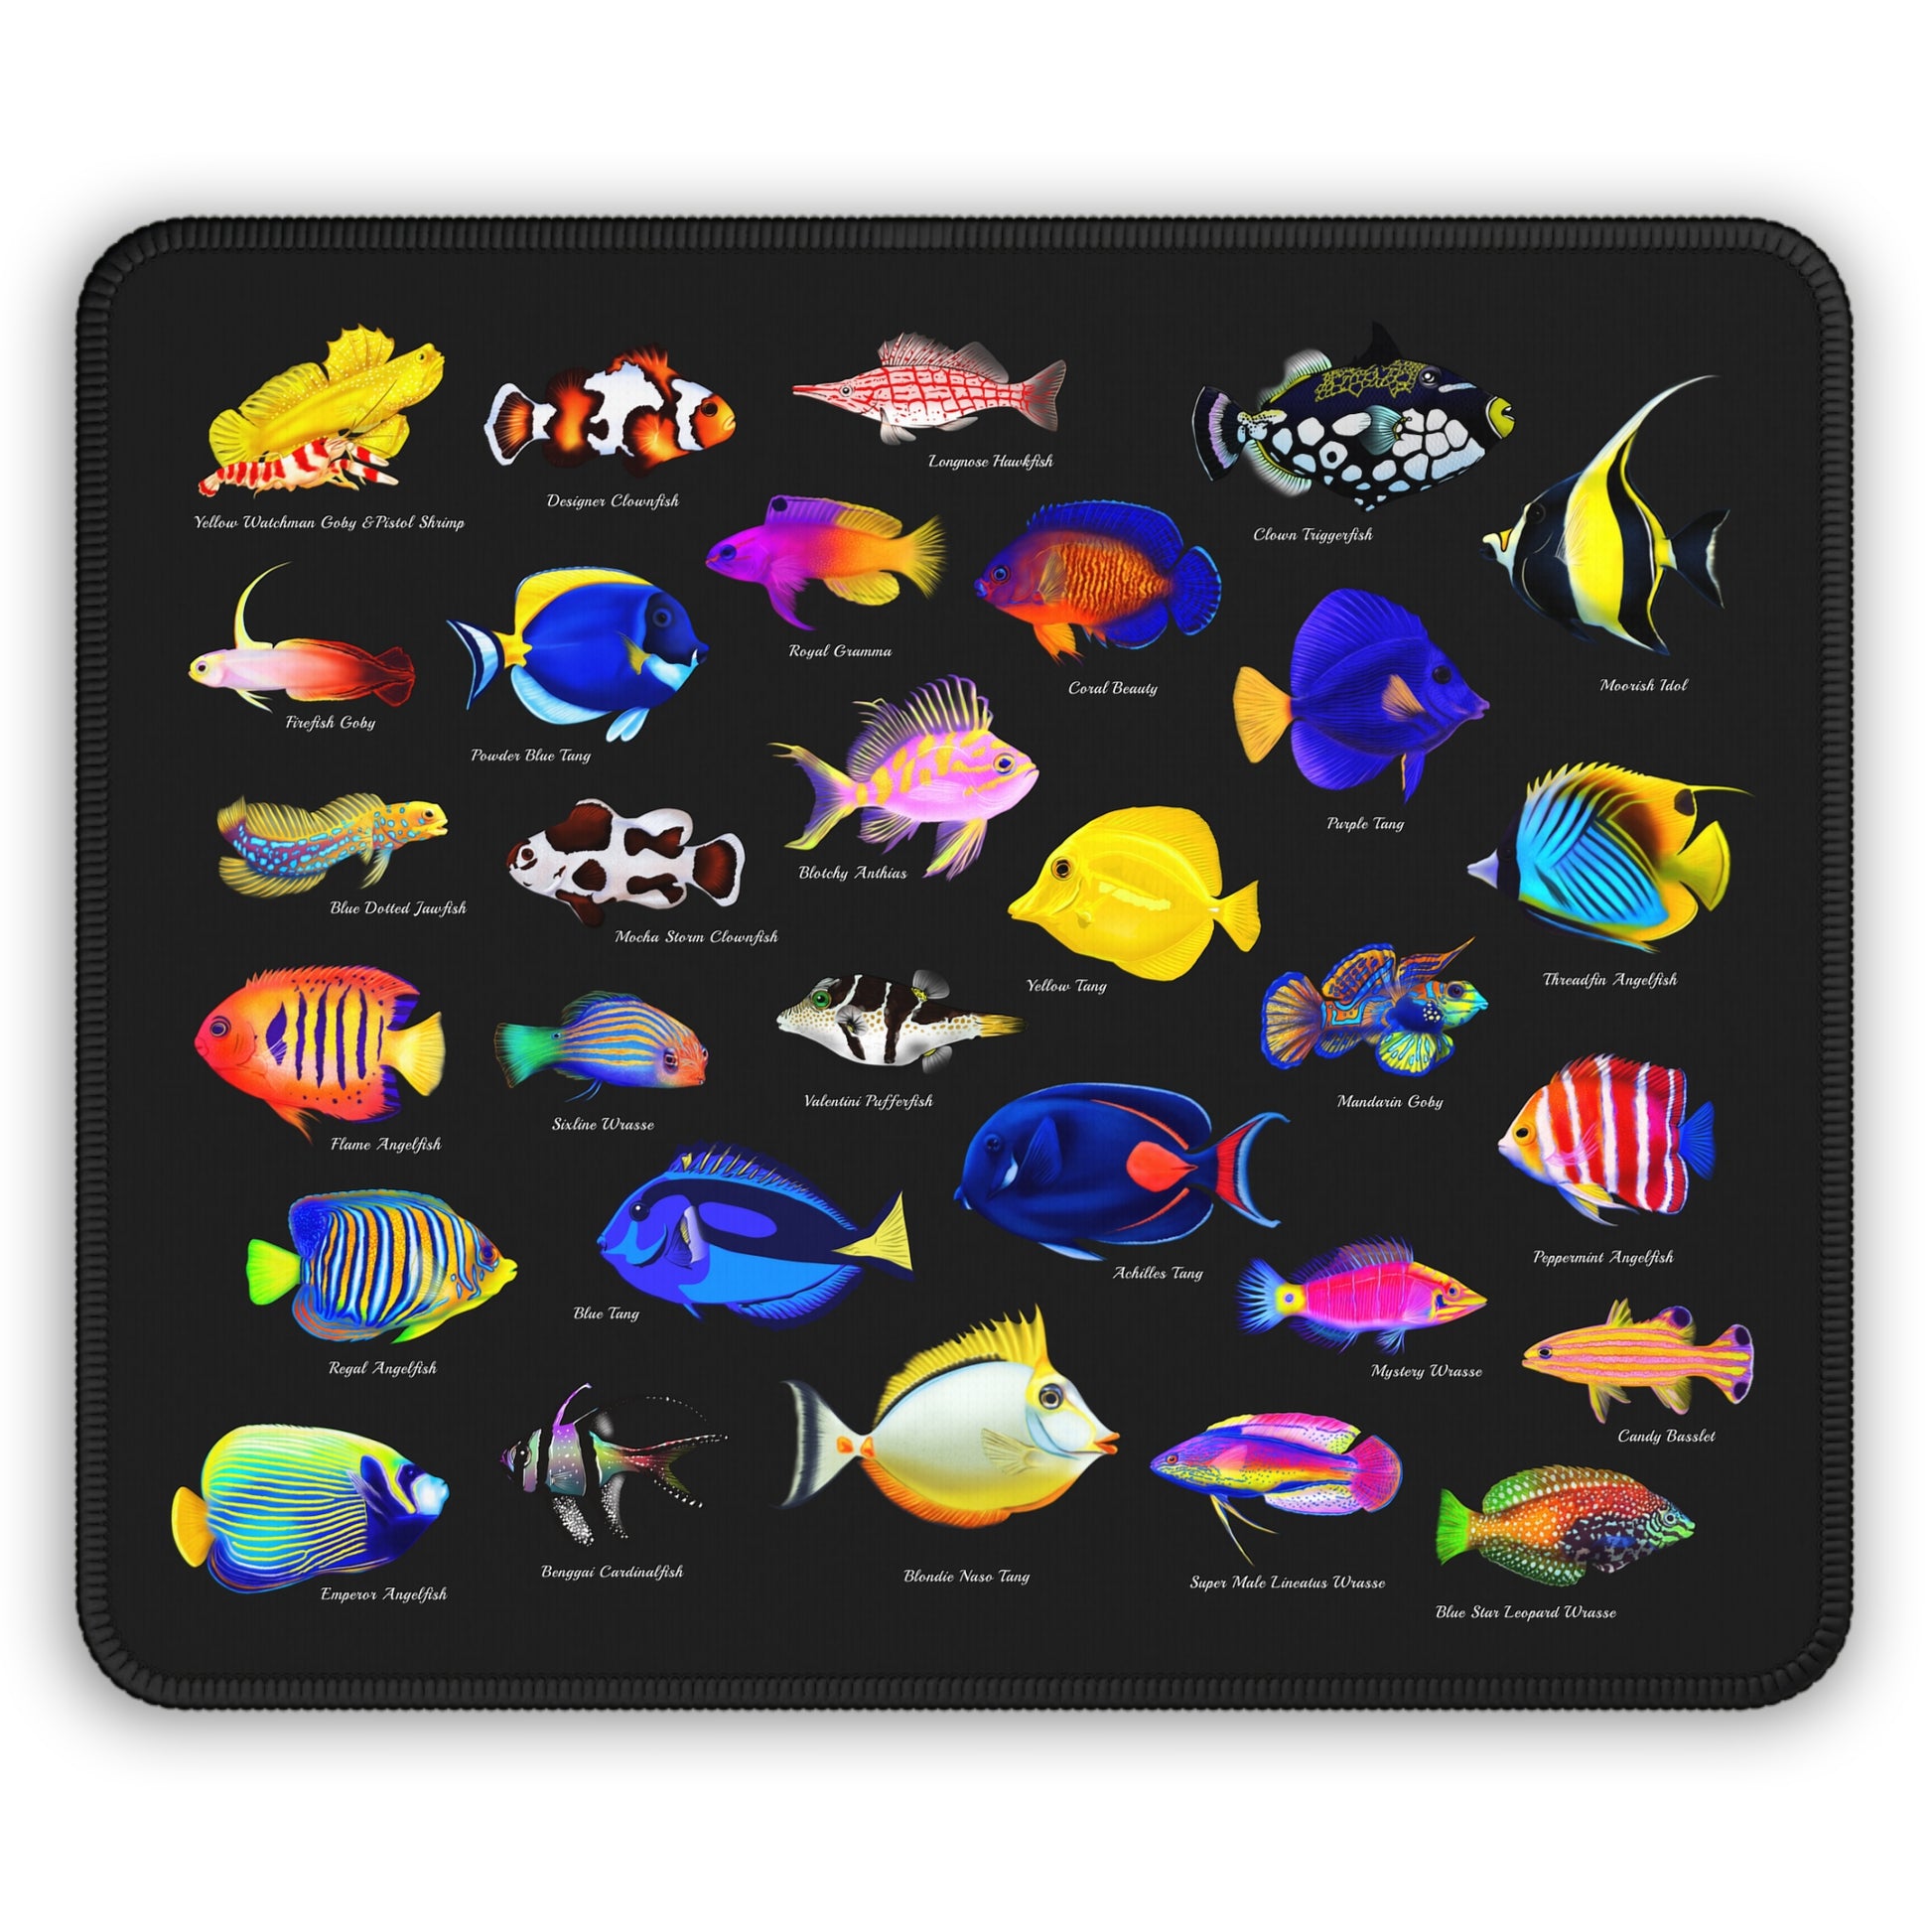 Saltwater Fish Collection - Reef of Clowns LLC